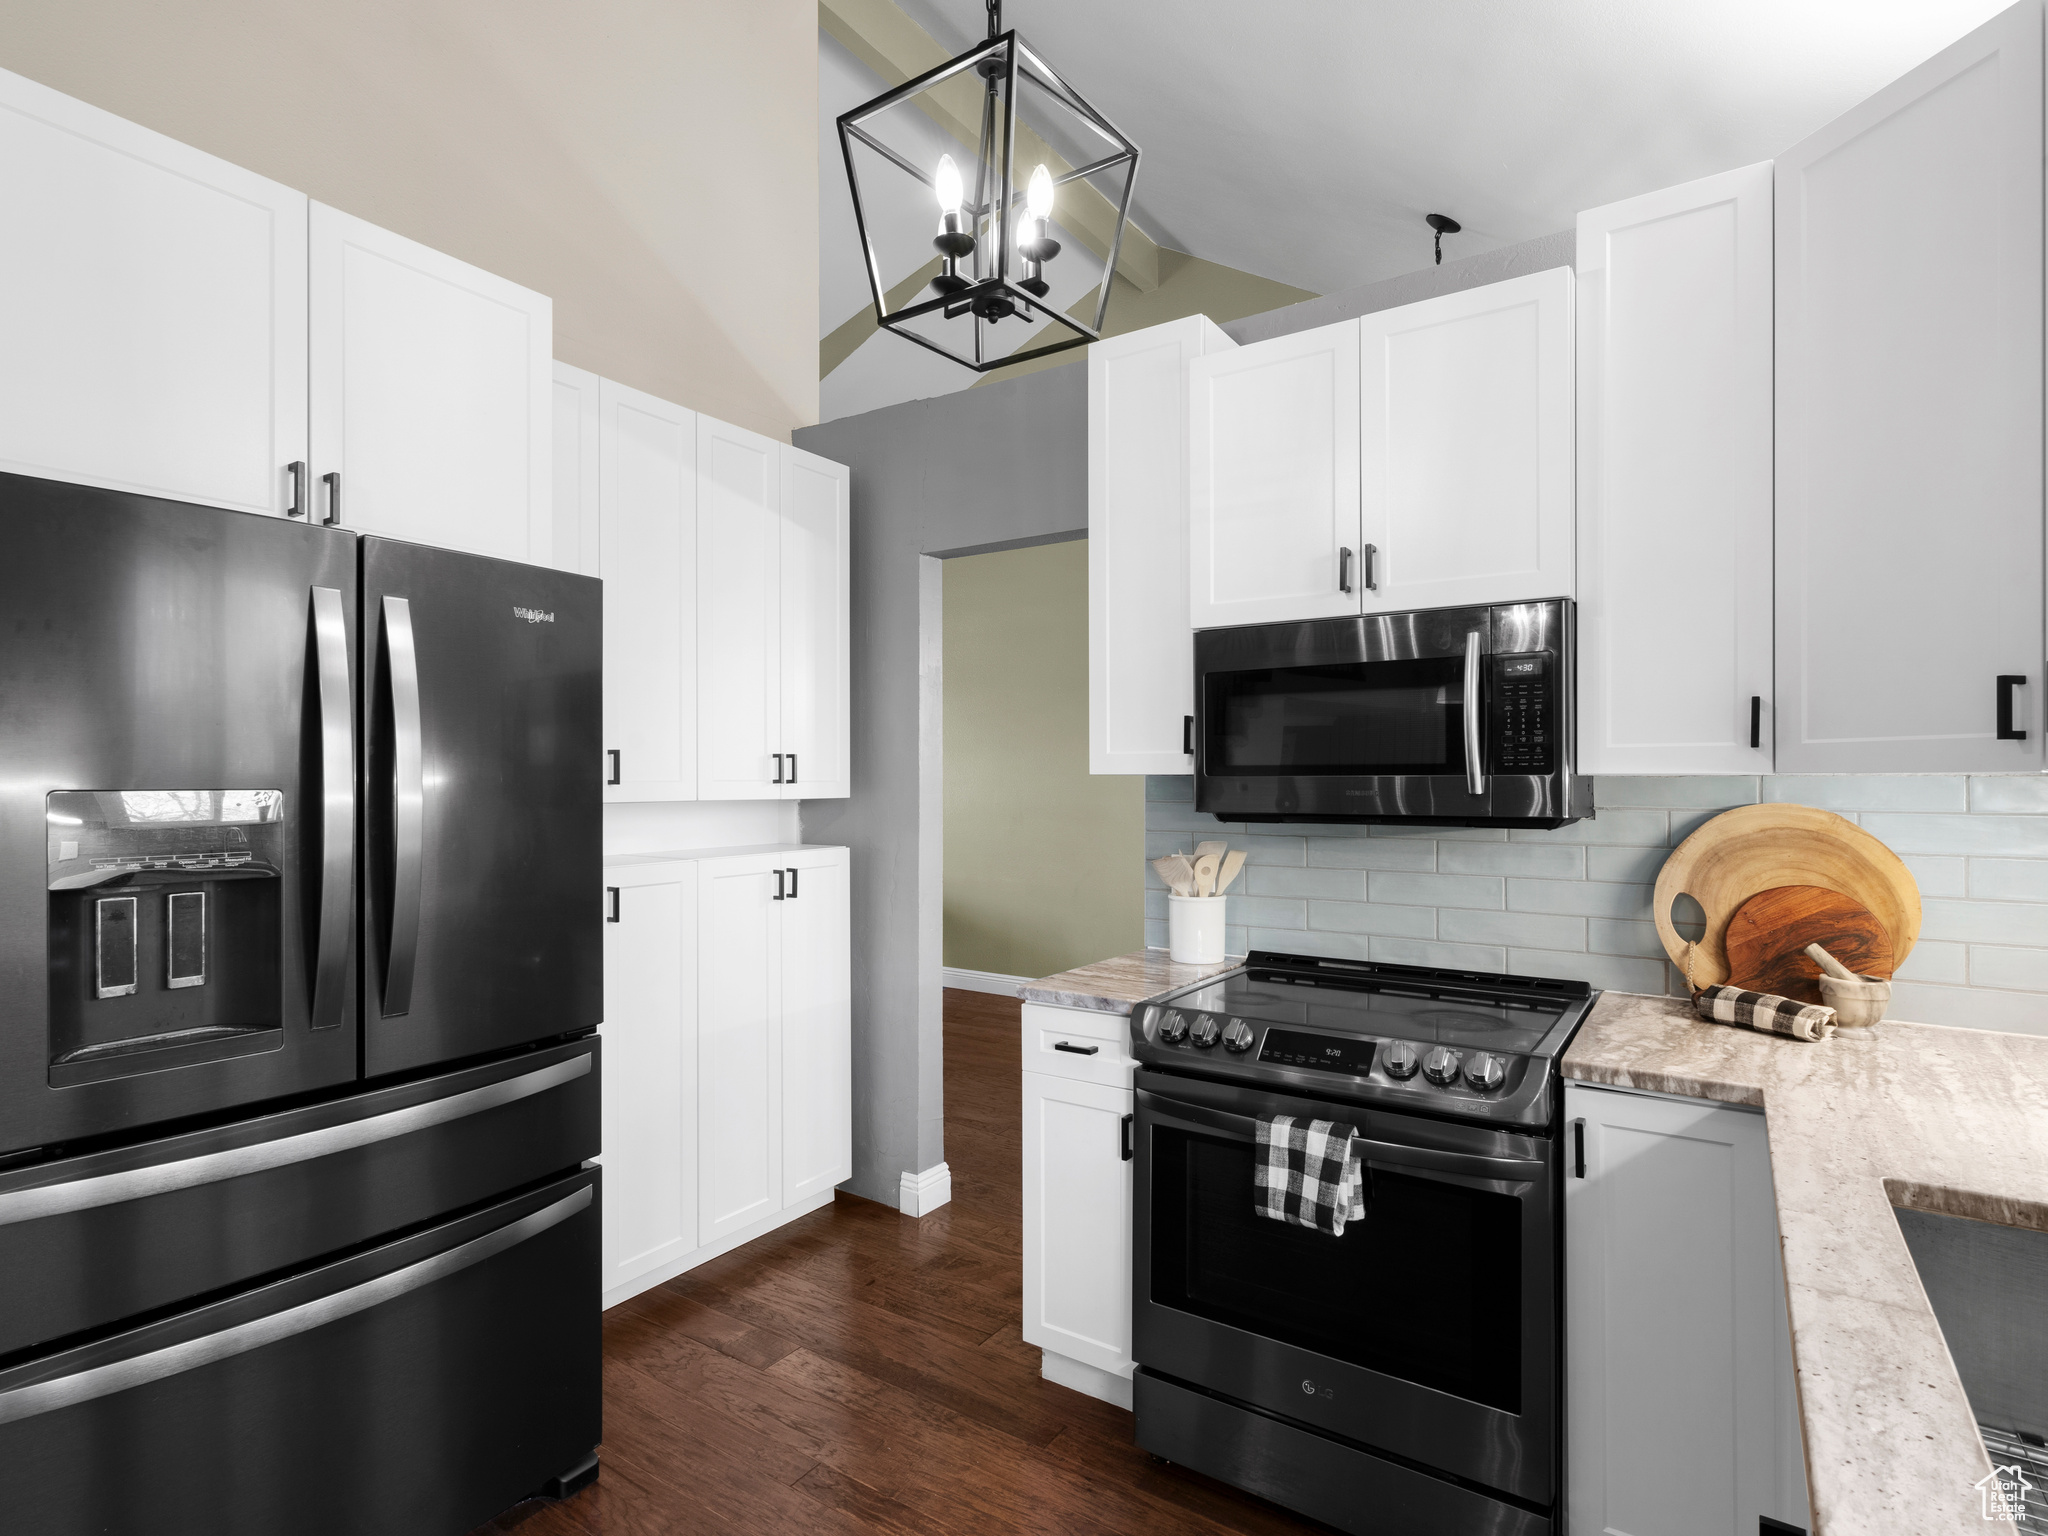 Kitchen with black refrigerator with ice dispenser, tasteful backsplash, dark wood-type flooring, white cabinets, and range with electric cooktop